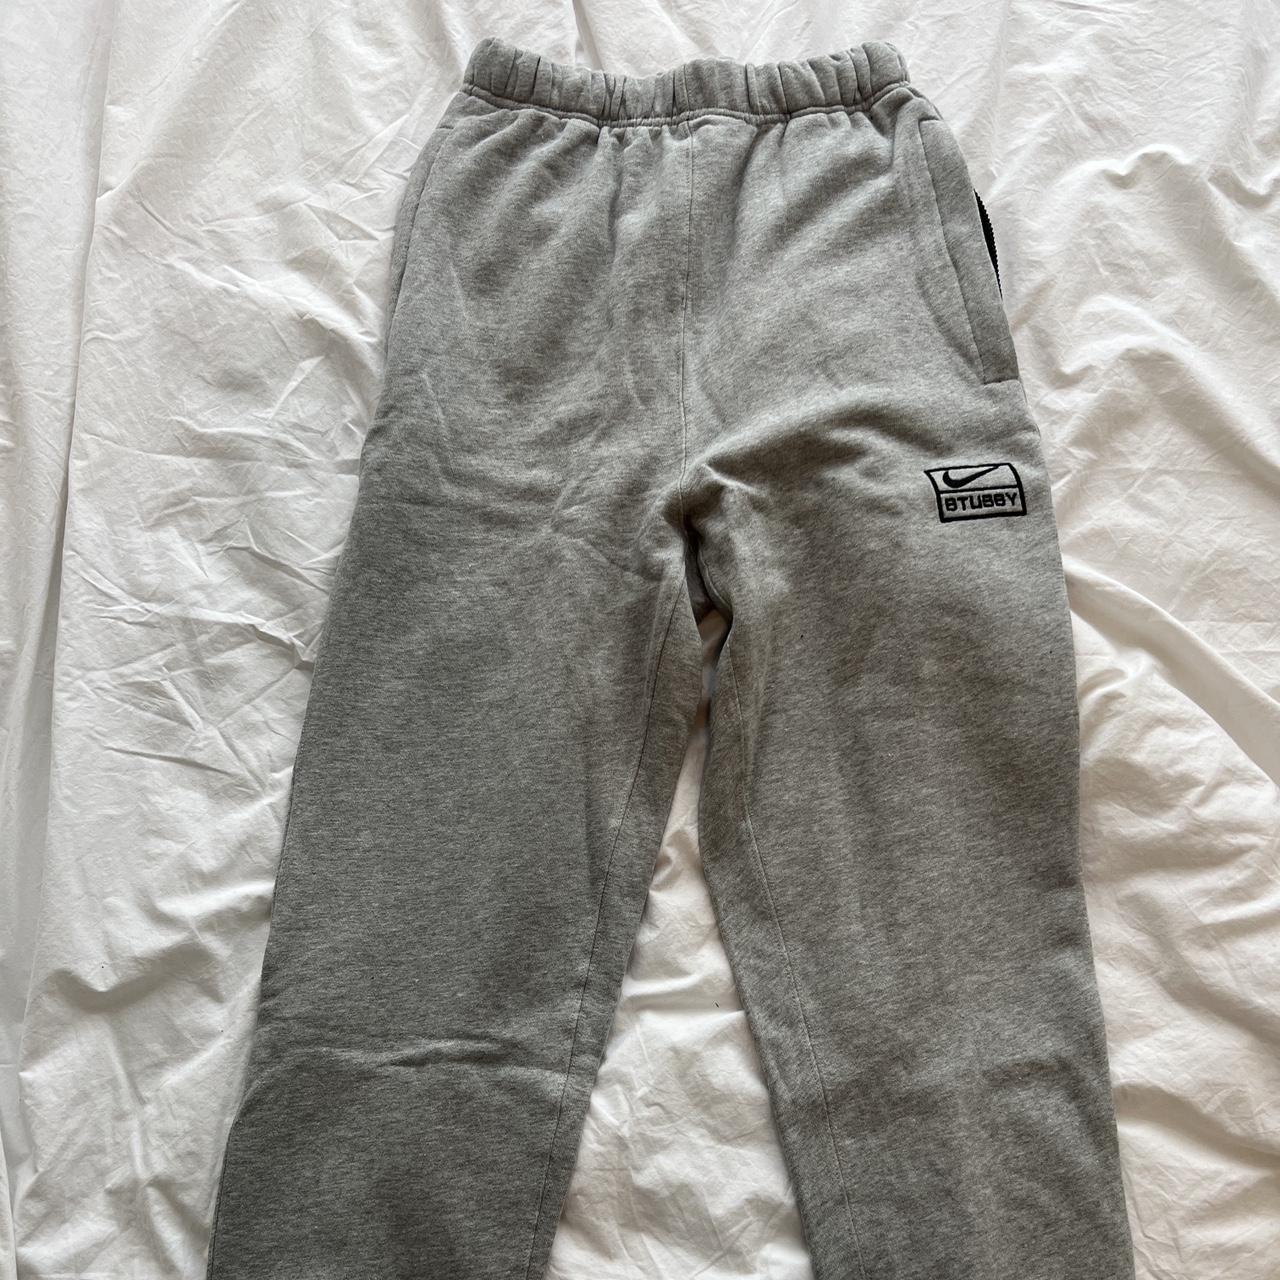 Nike x stussy joggers Size small Never worn Open... - Depop